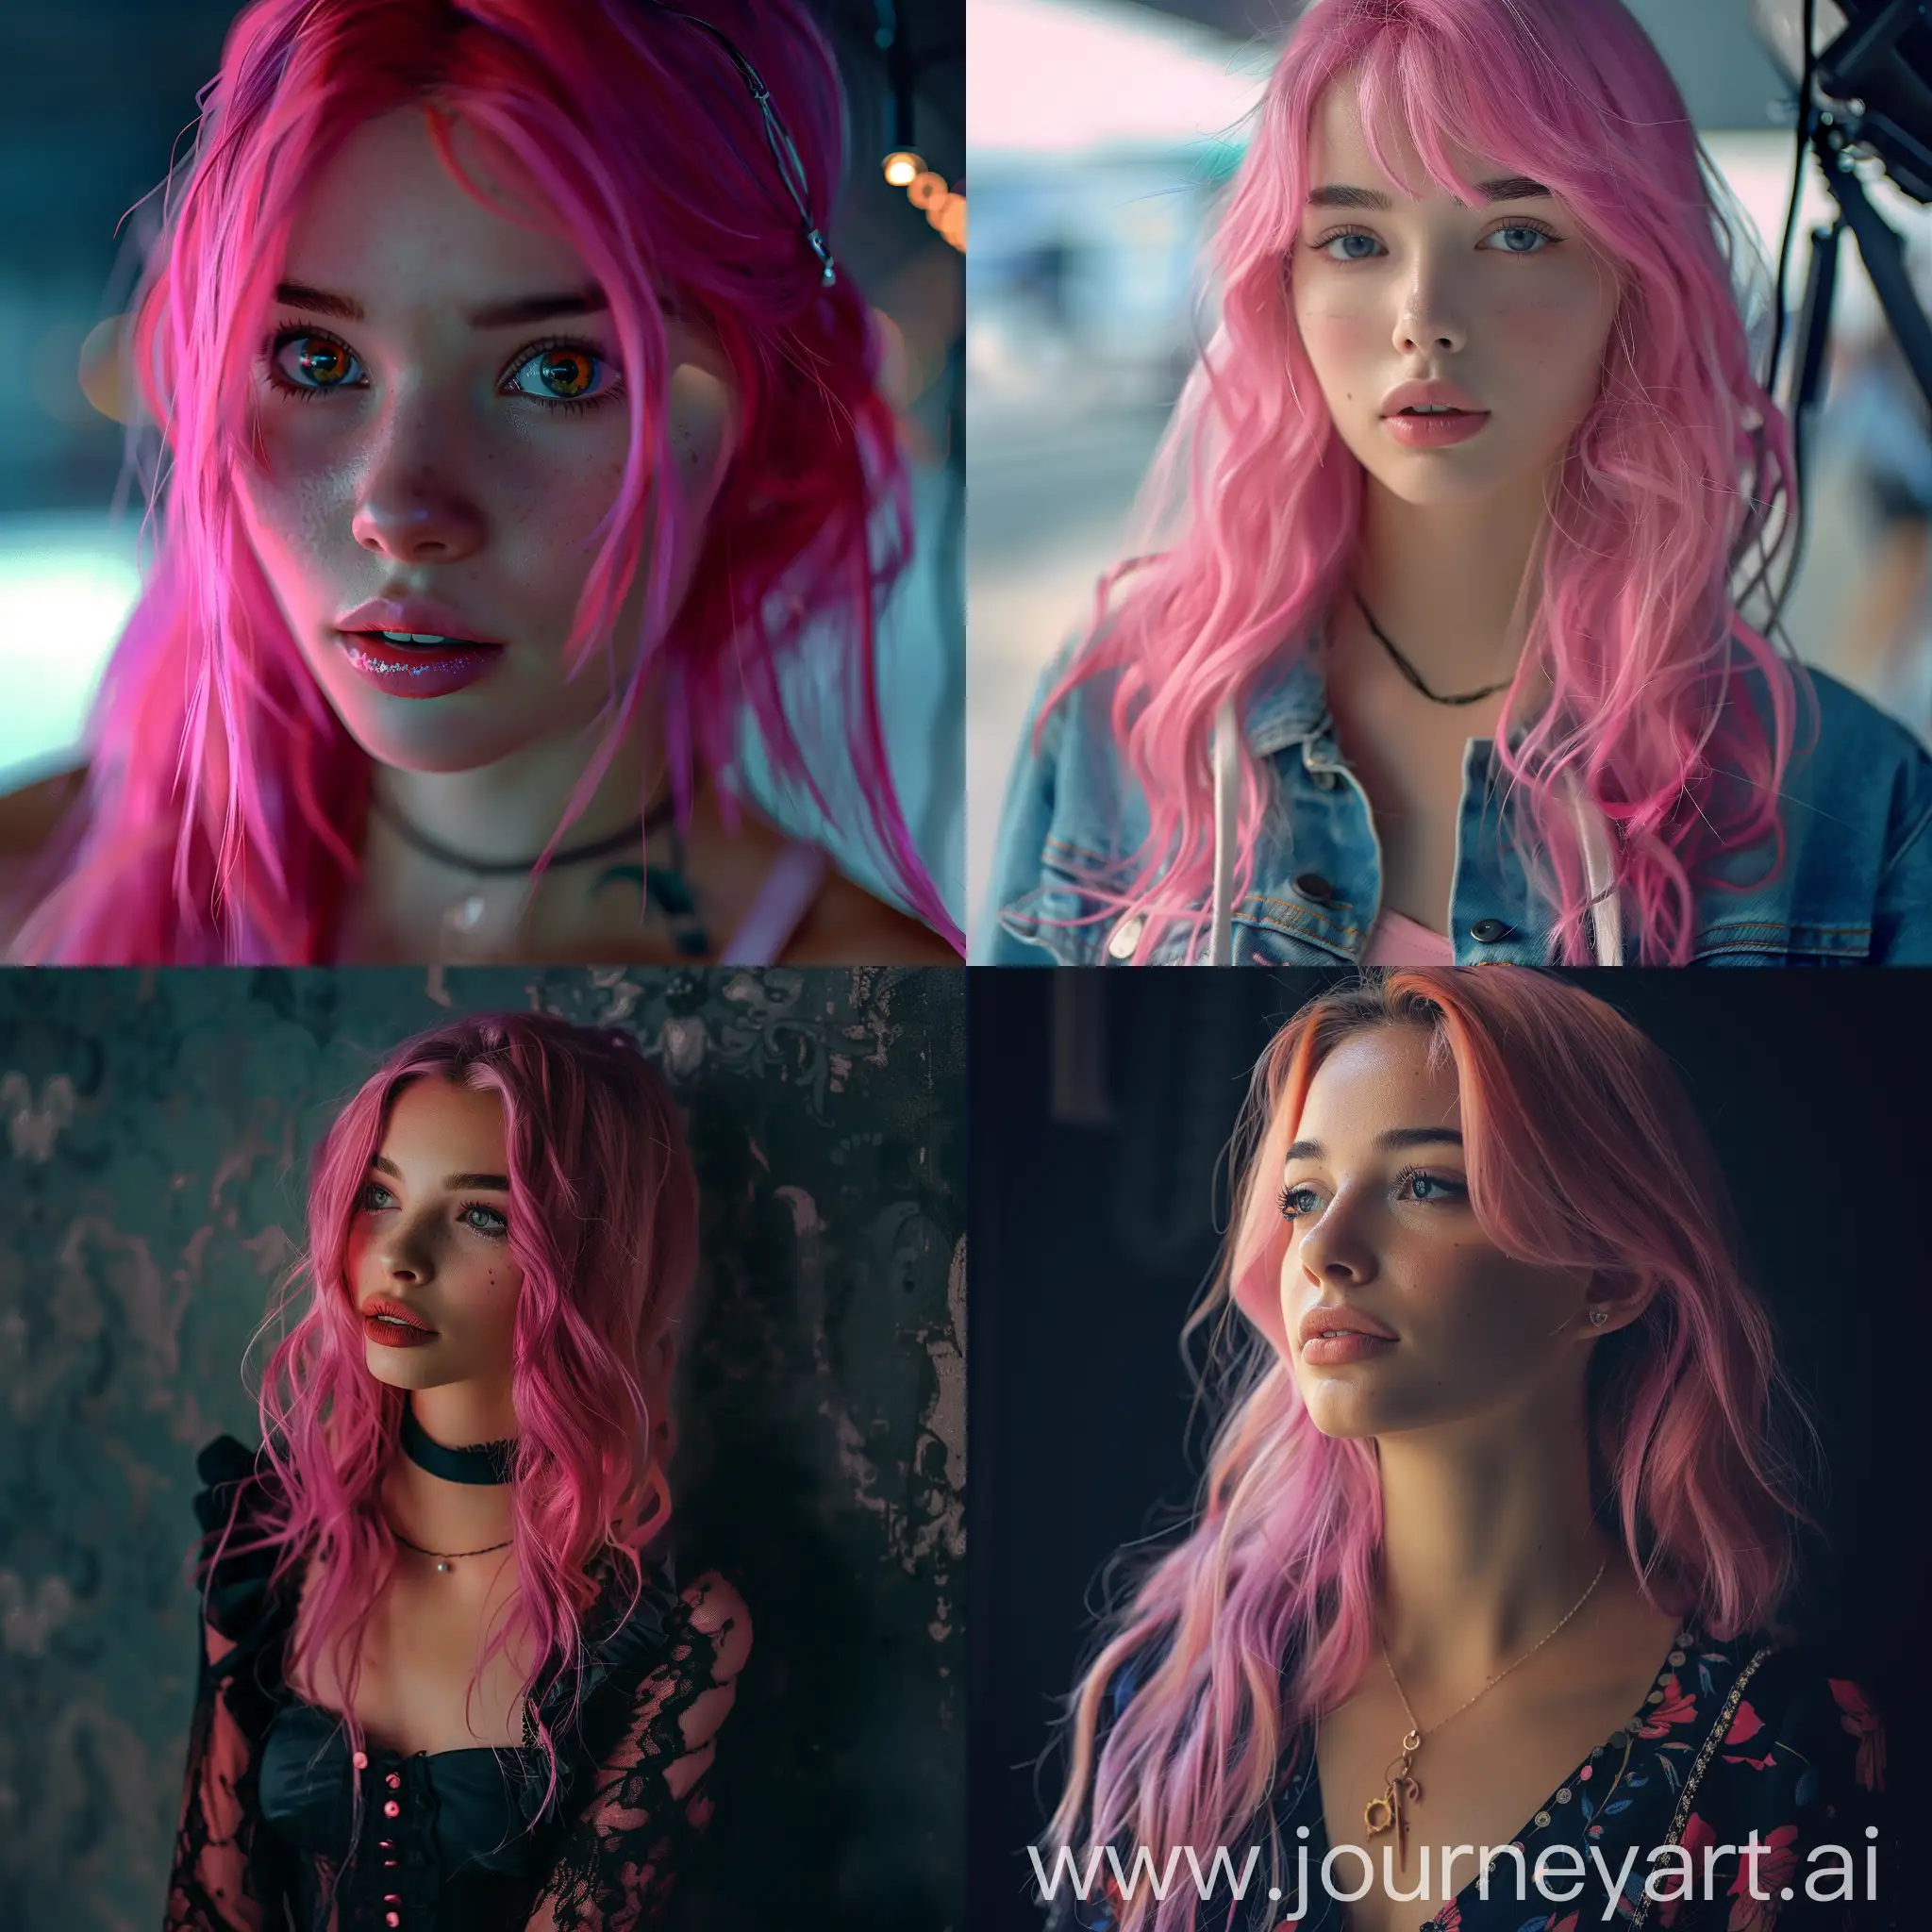 Cinematic-8K-Portrait-of-a-Vibrant-21YearOld-Influencer-with-Pink-Hair